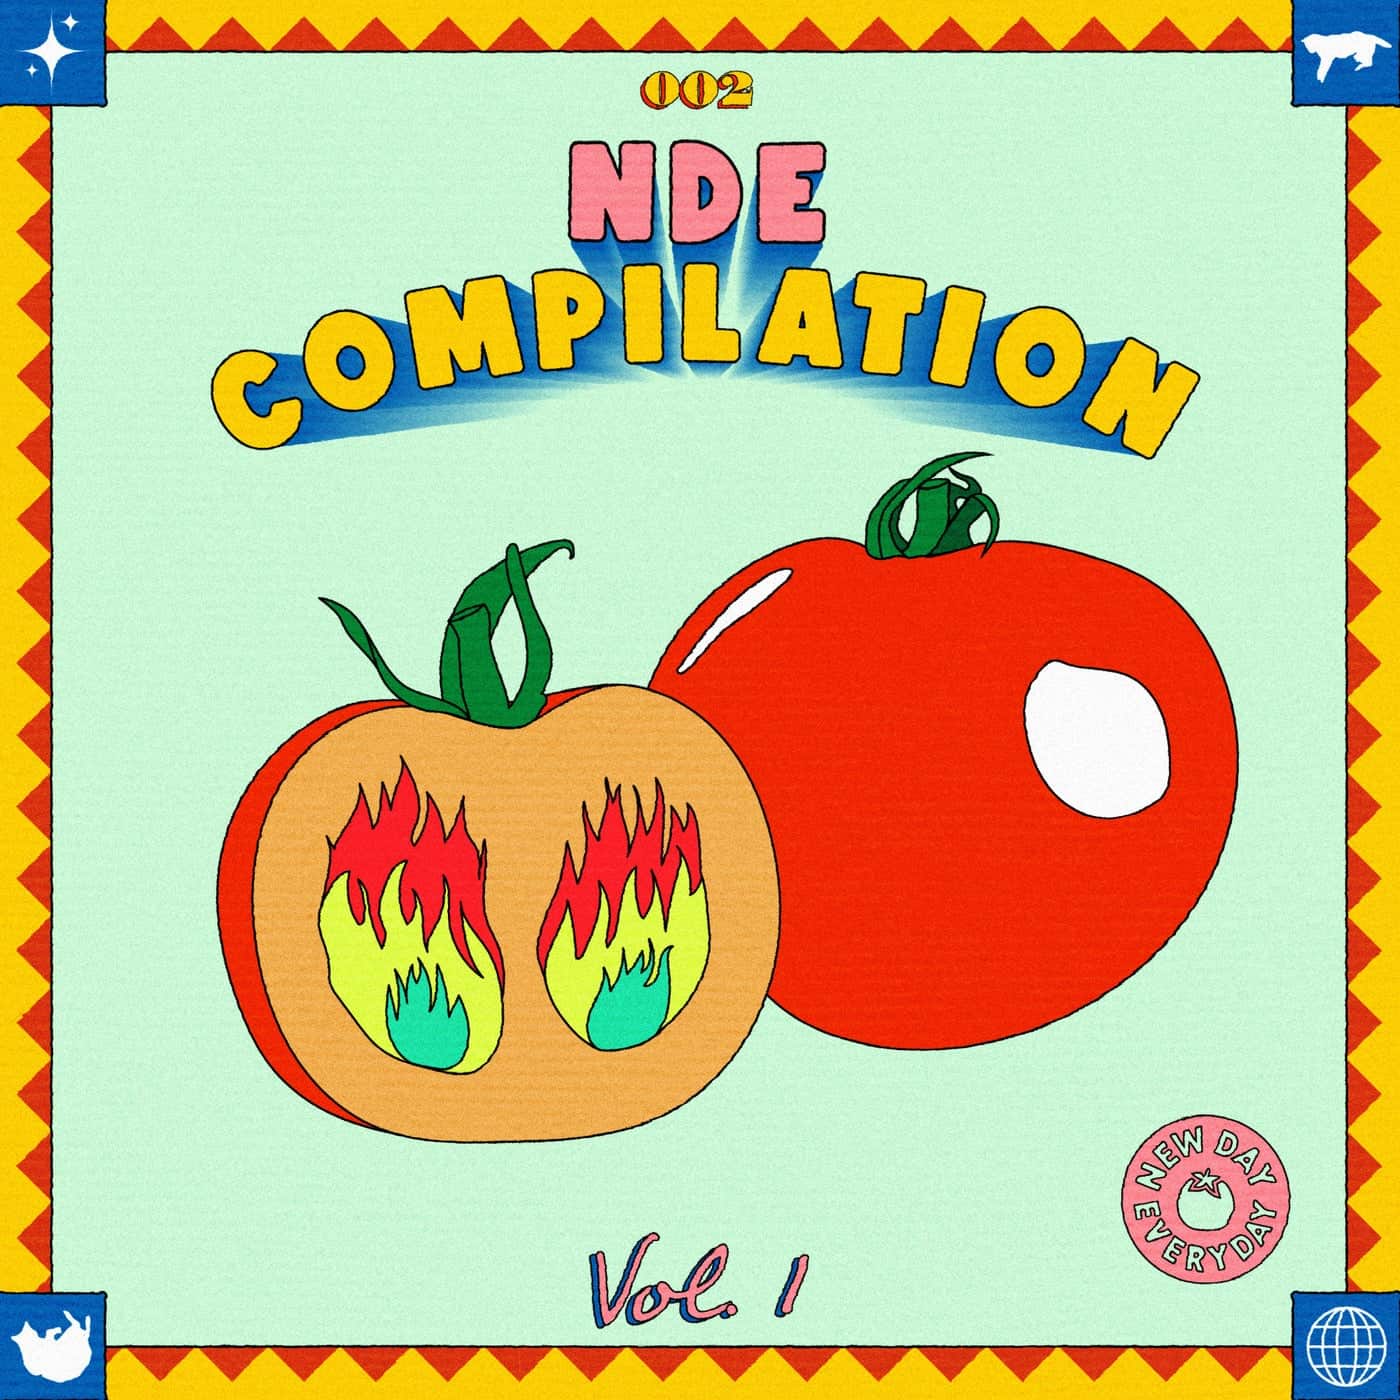 image cover: VA - NDE Compilation 002 Vol.1 / NDEC002